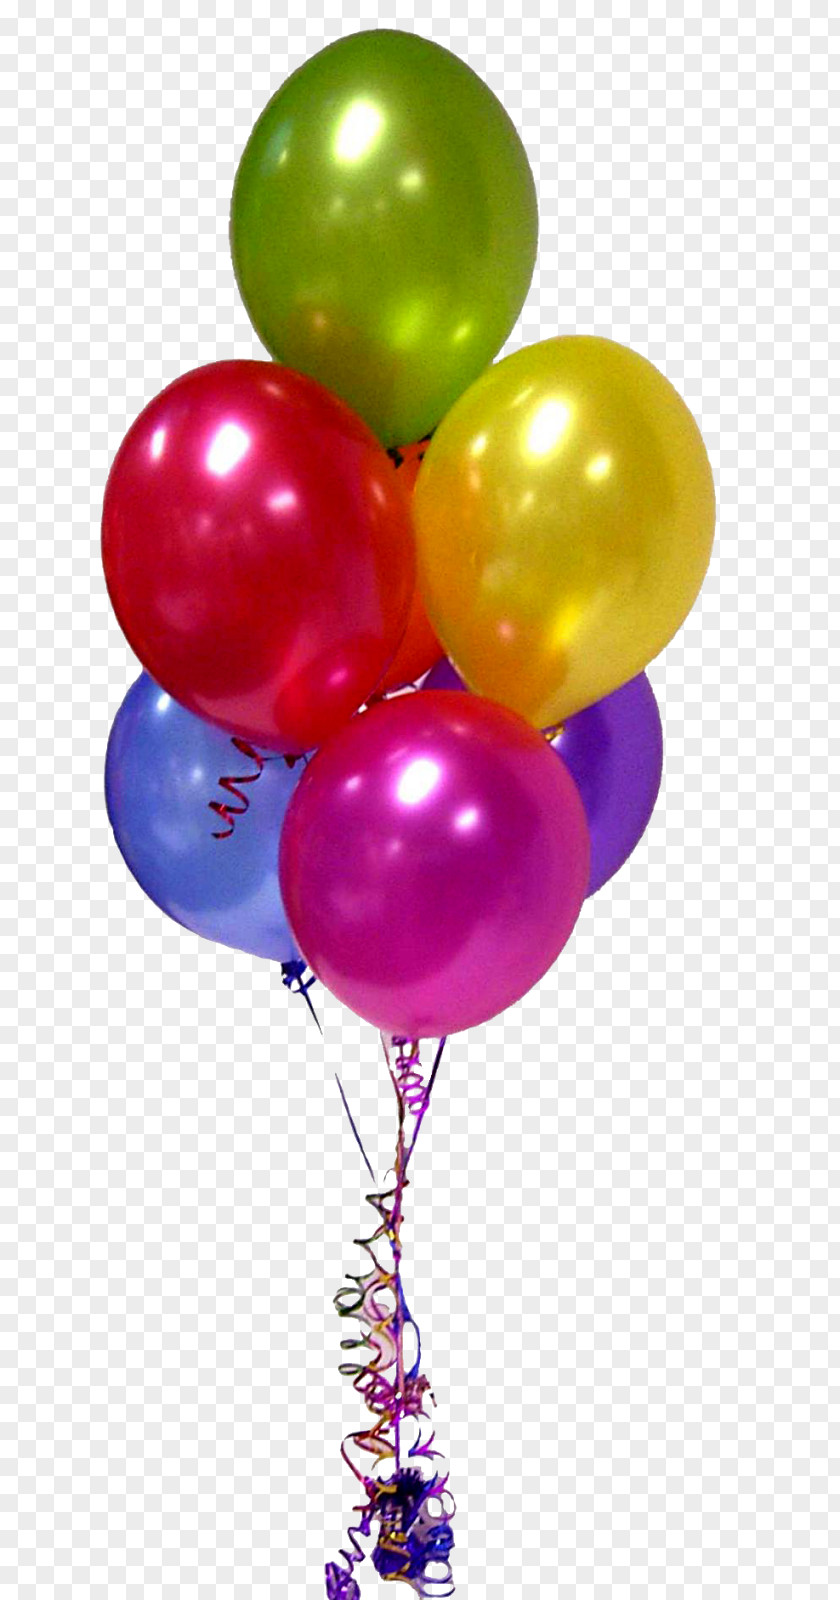 Balloons Gas Balloon Helium Flower Bouquet Party PNG